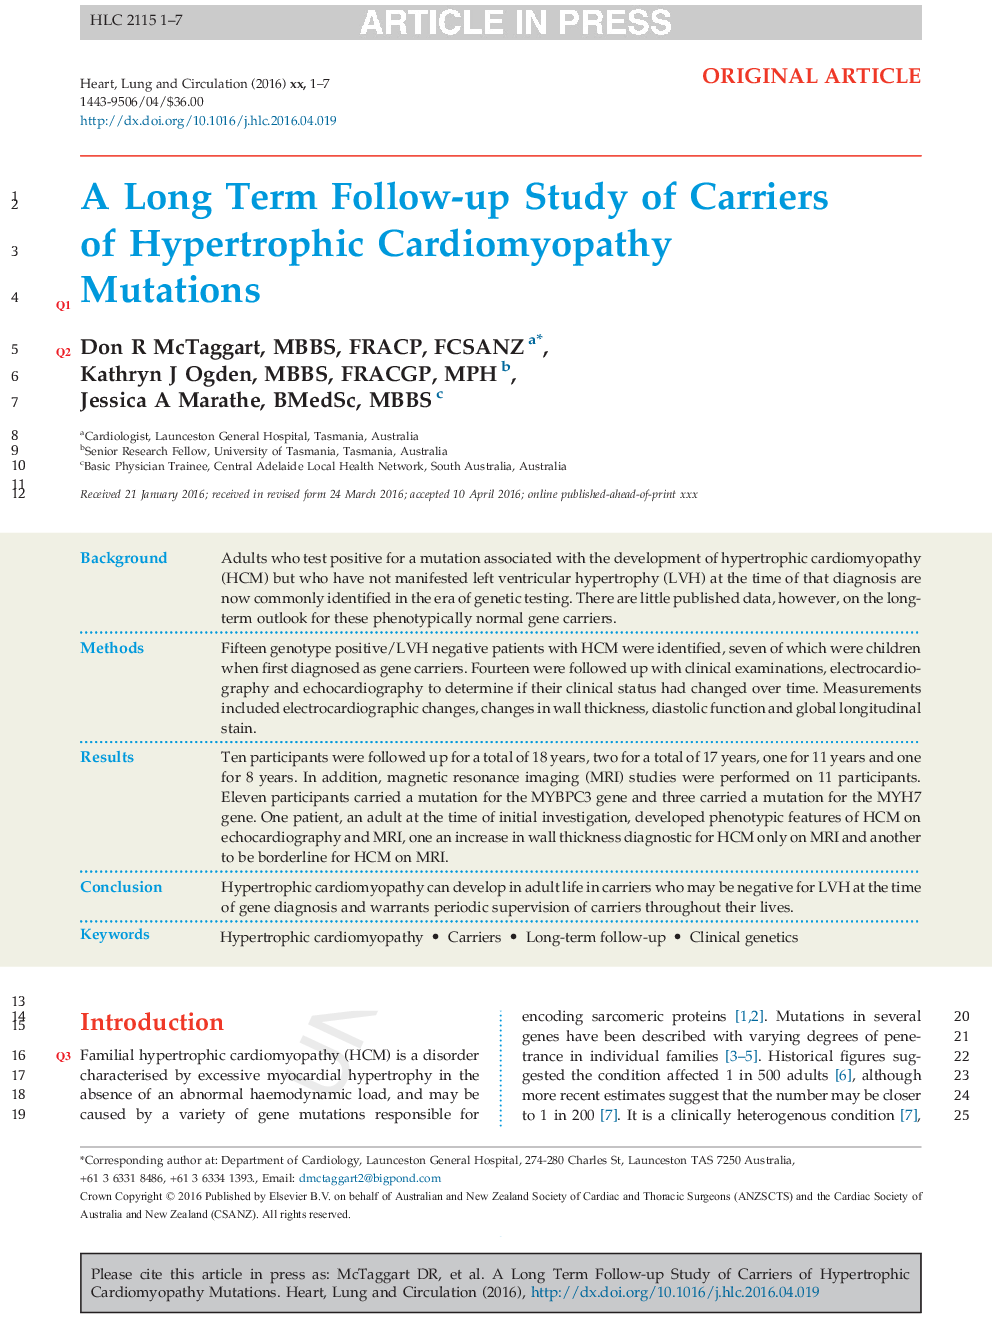 A Long Term Follow-up Study of Carriers of Hypertrophic Cardiomyopathy Mutations